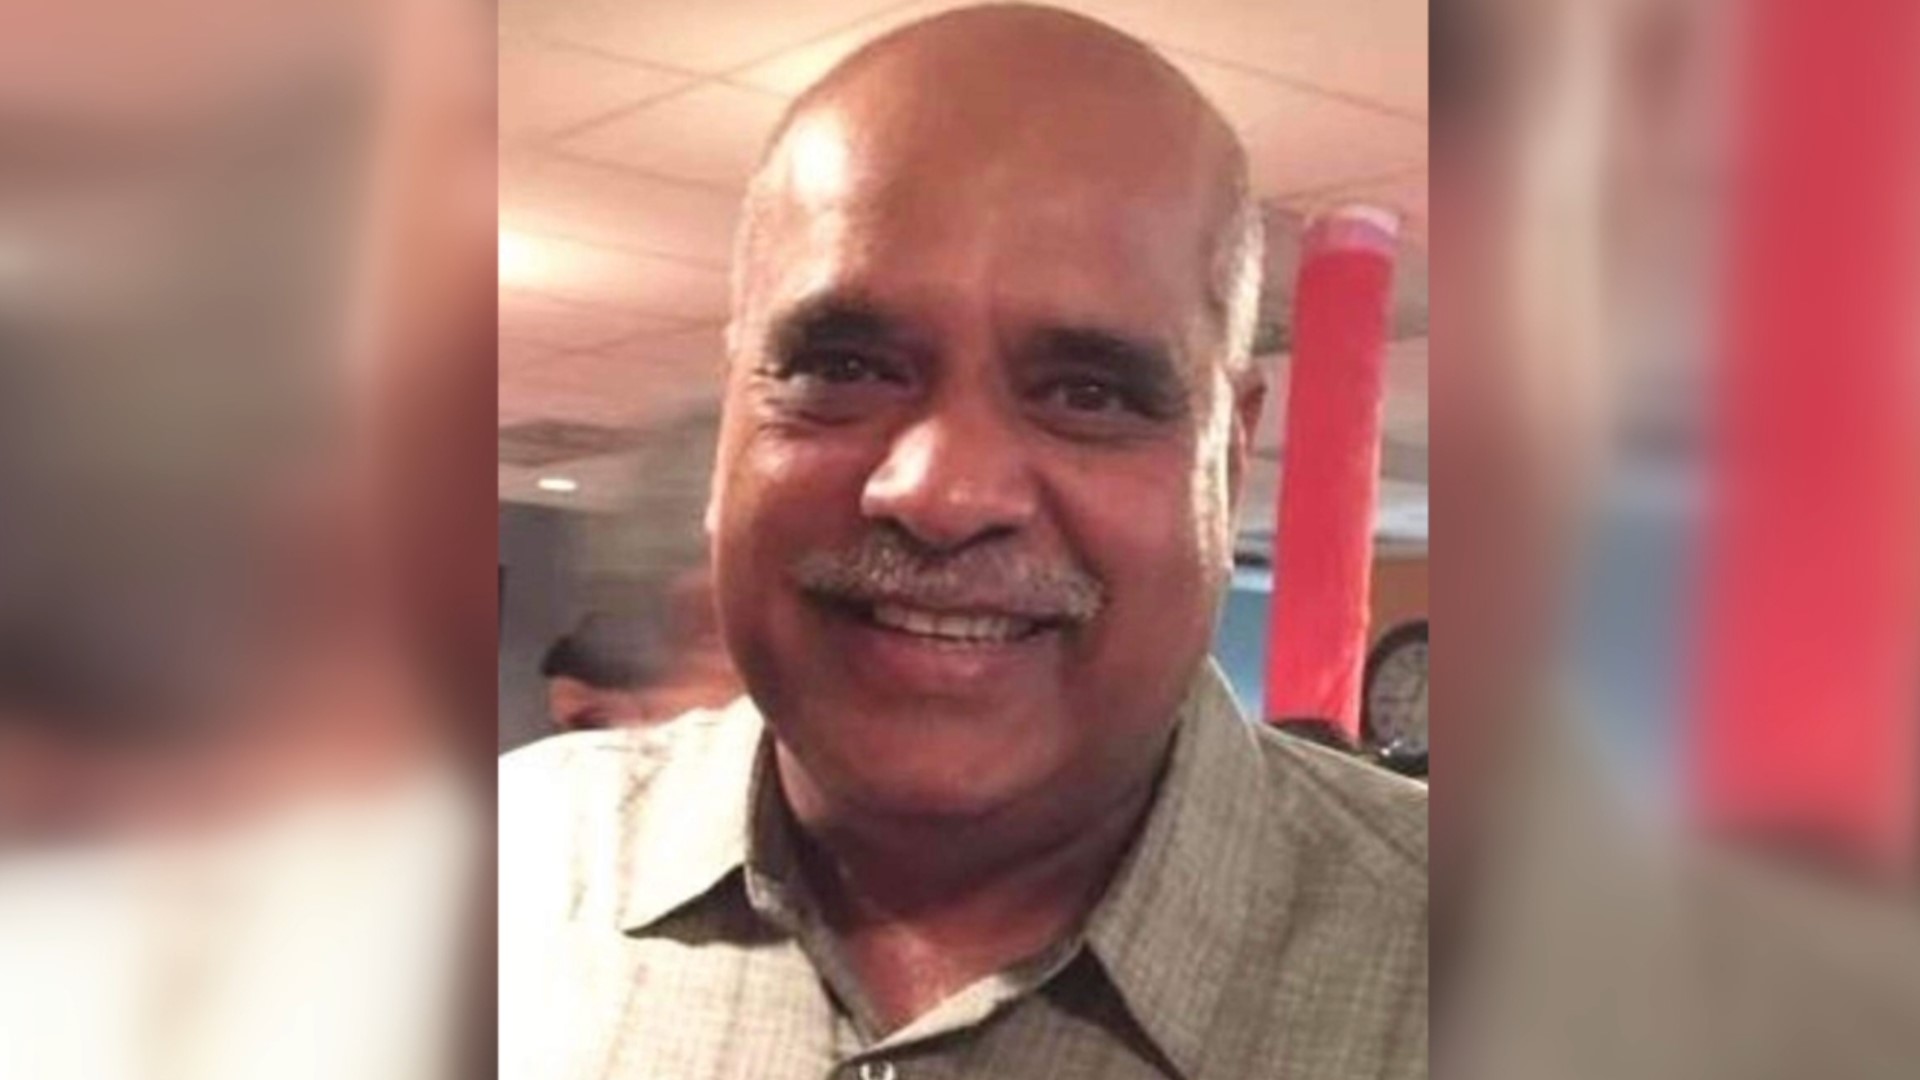 63-year-old Anwar Machiwalla was shot and killed on July 11, 2016 at the Three Palms Grocery store on Highway 88